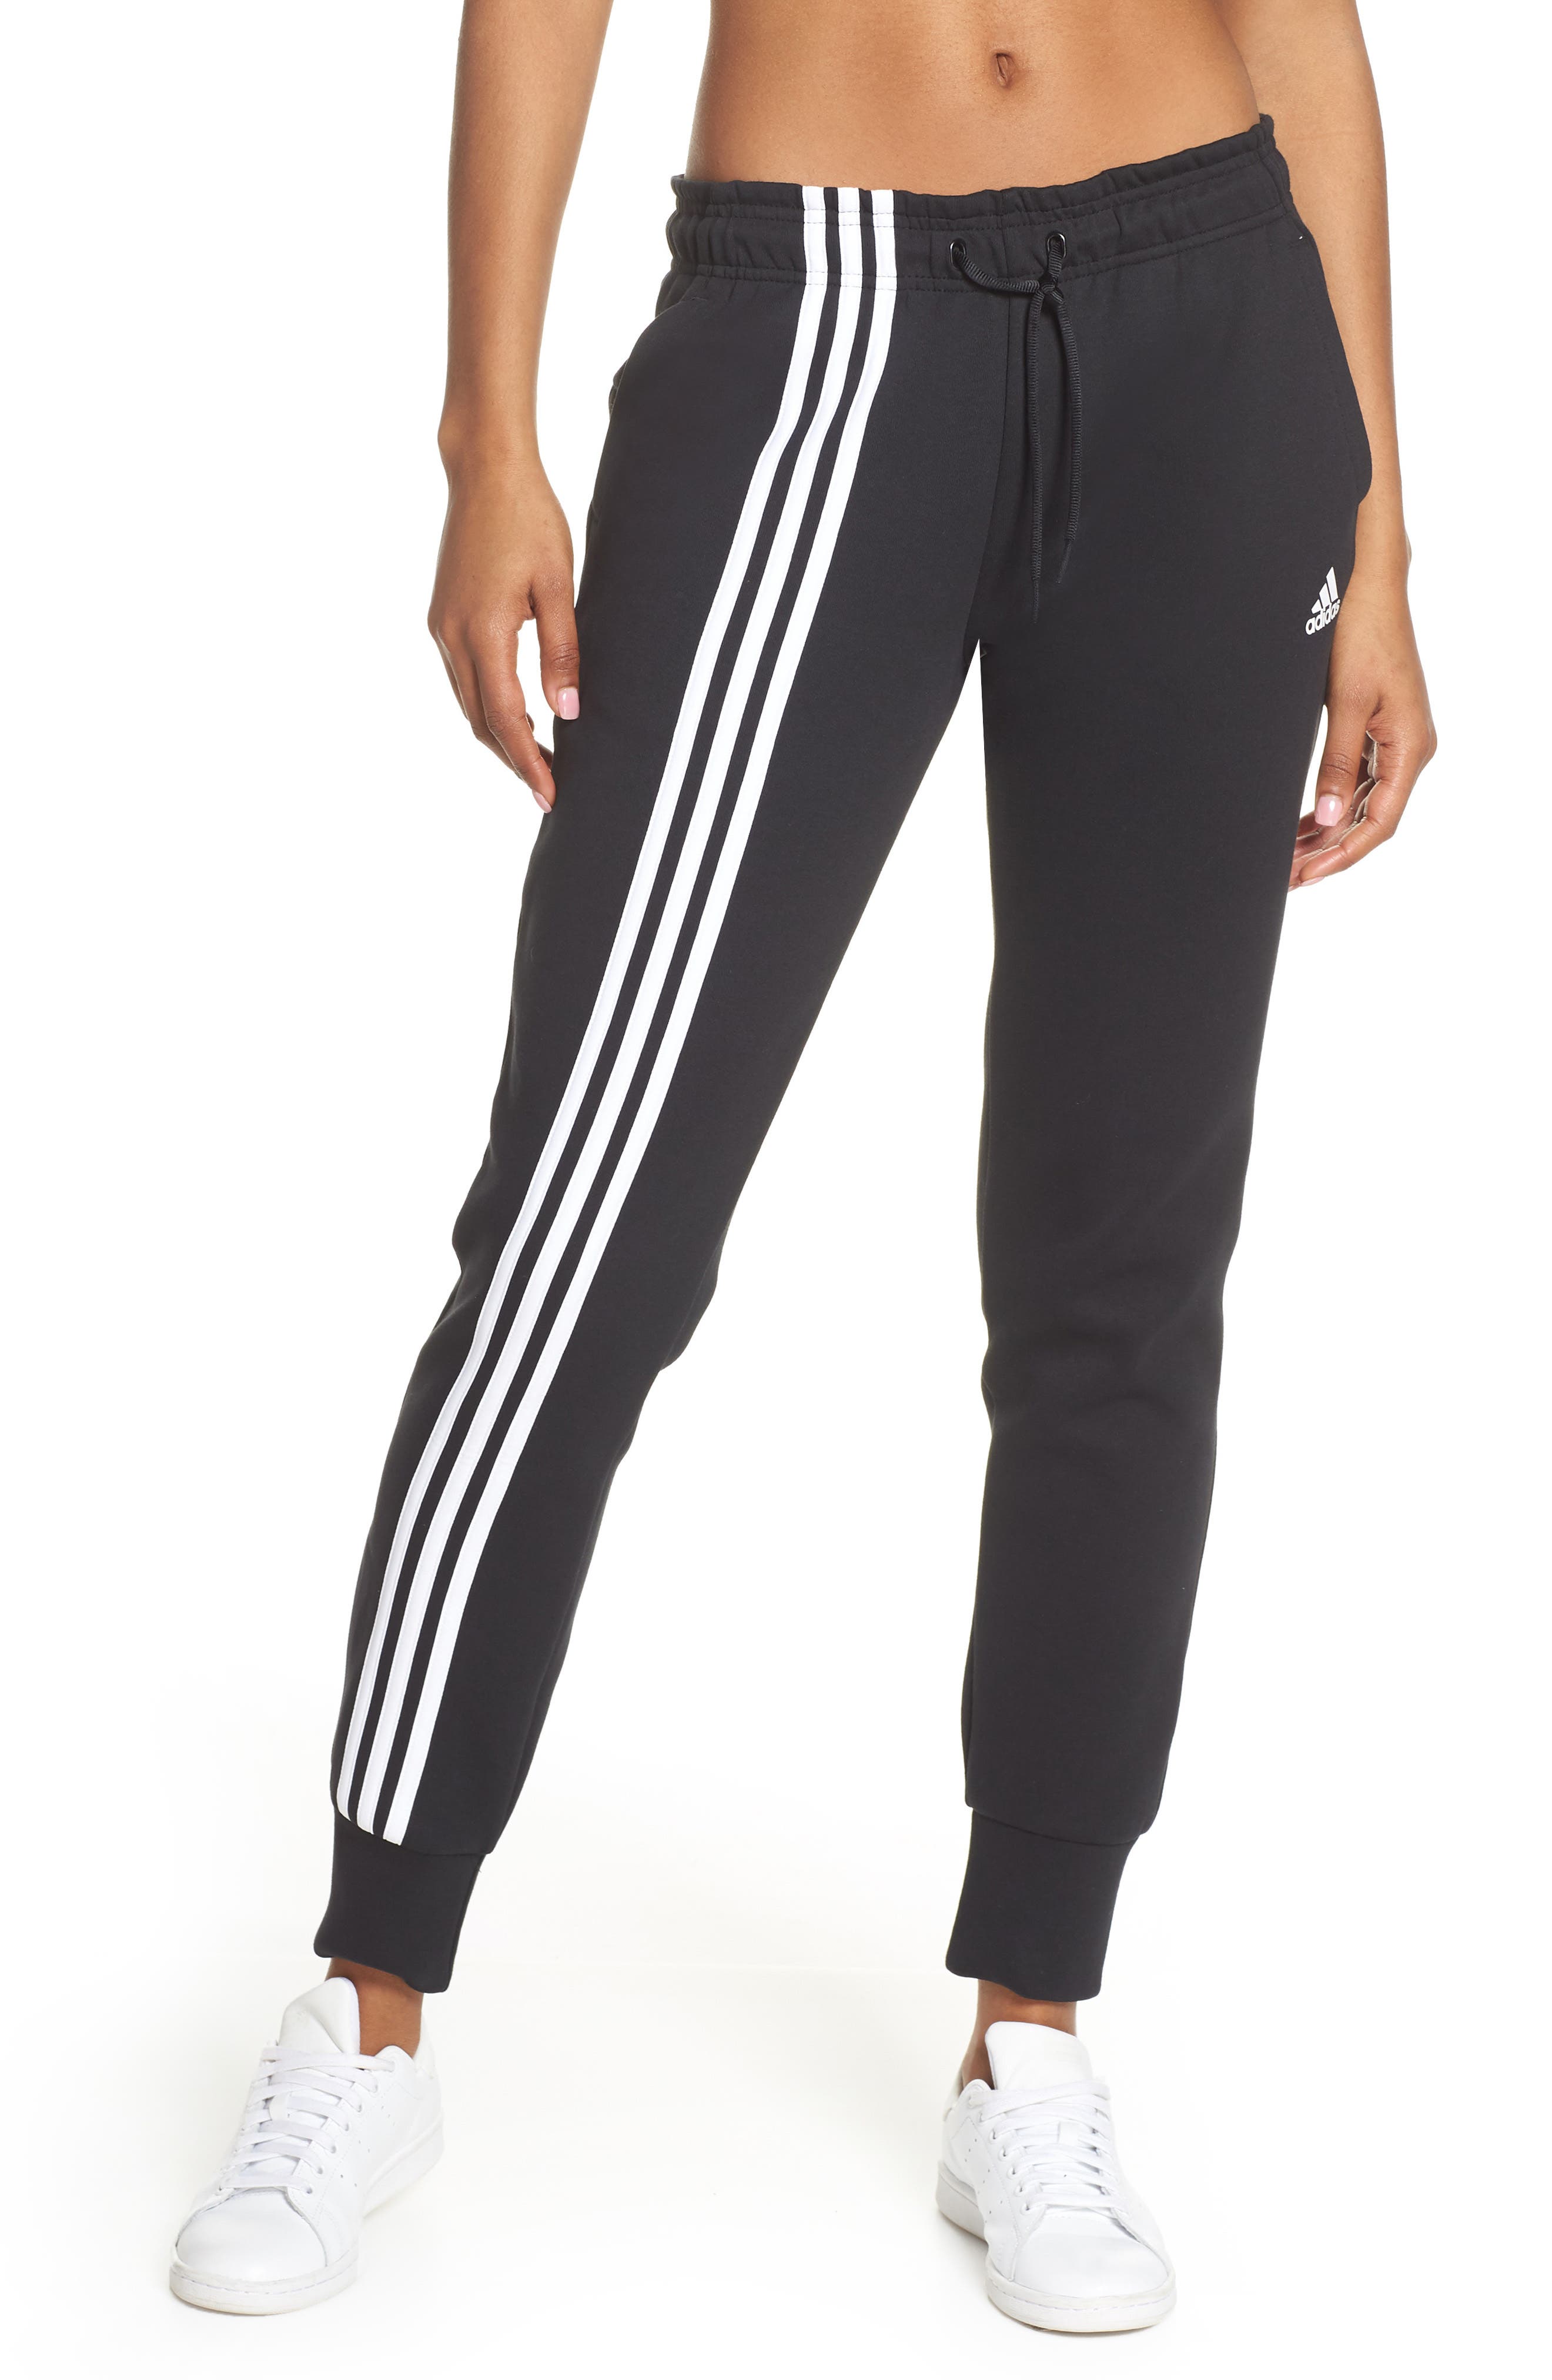 adidas brand with the 3 stripes pants